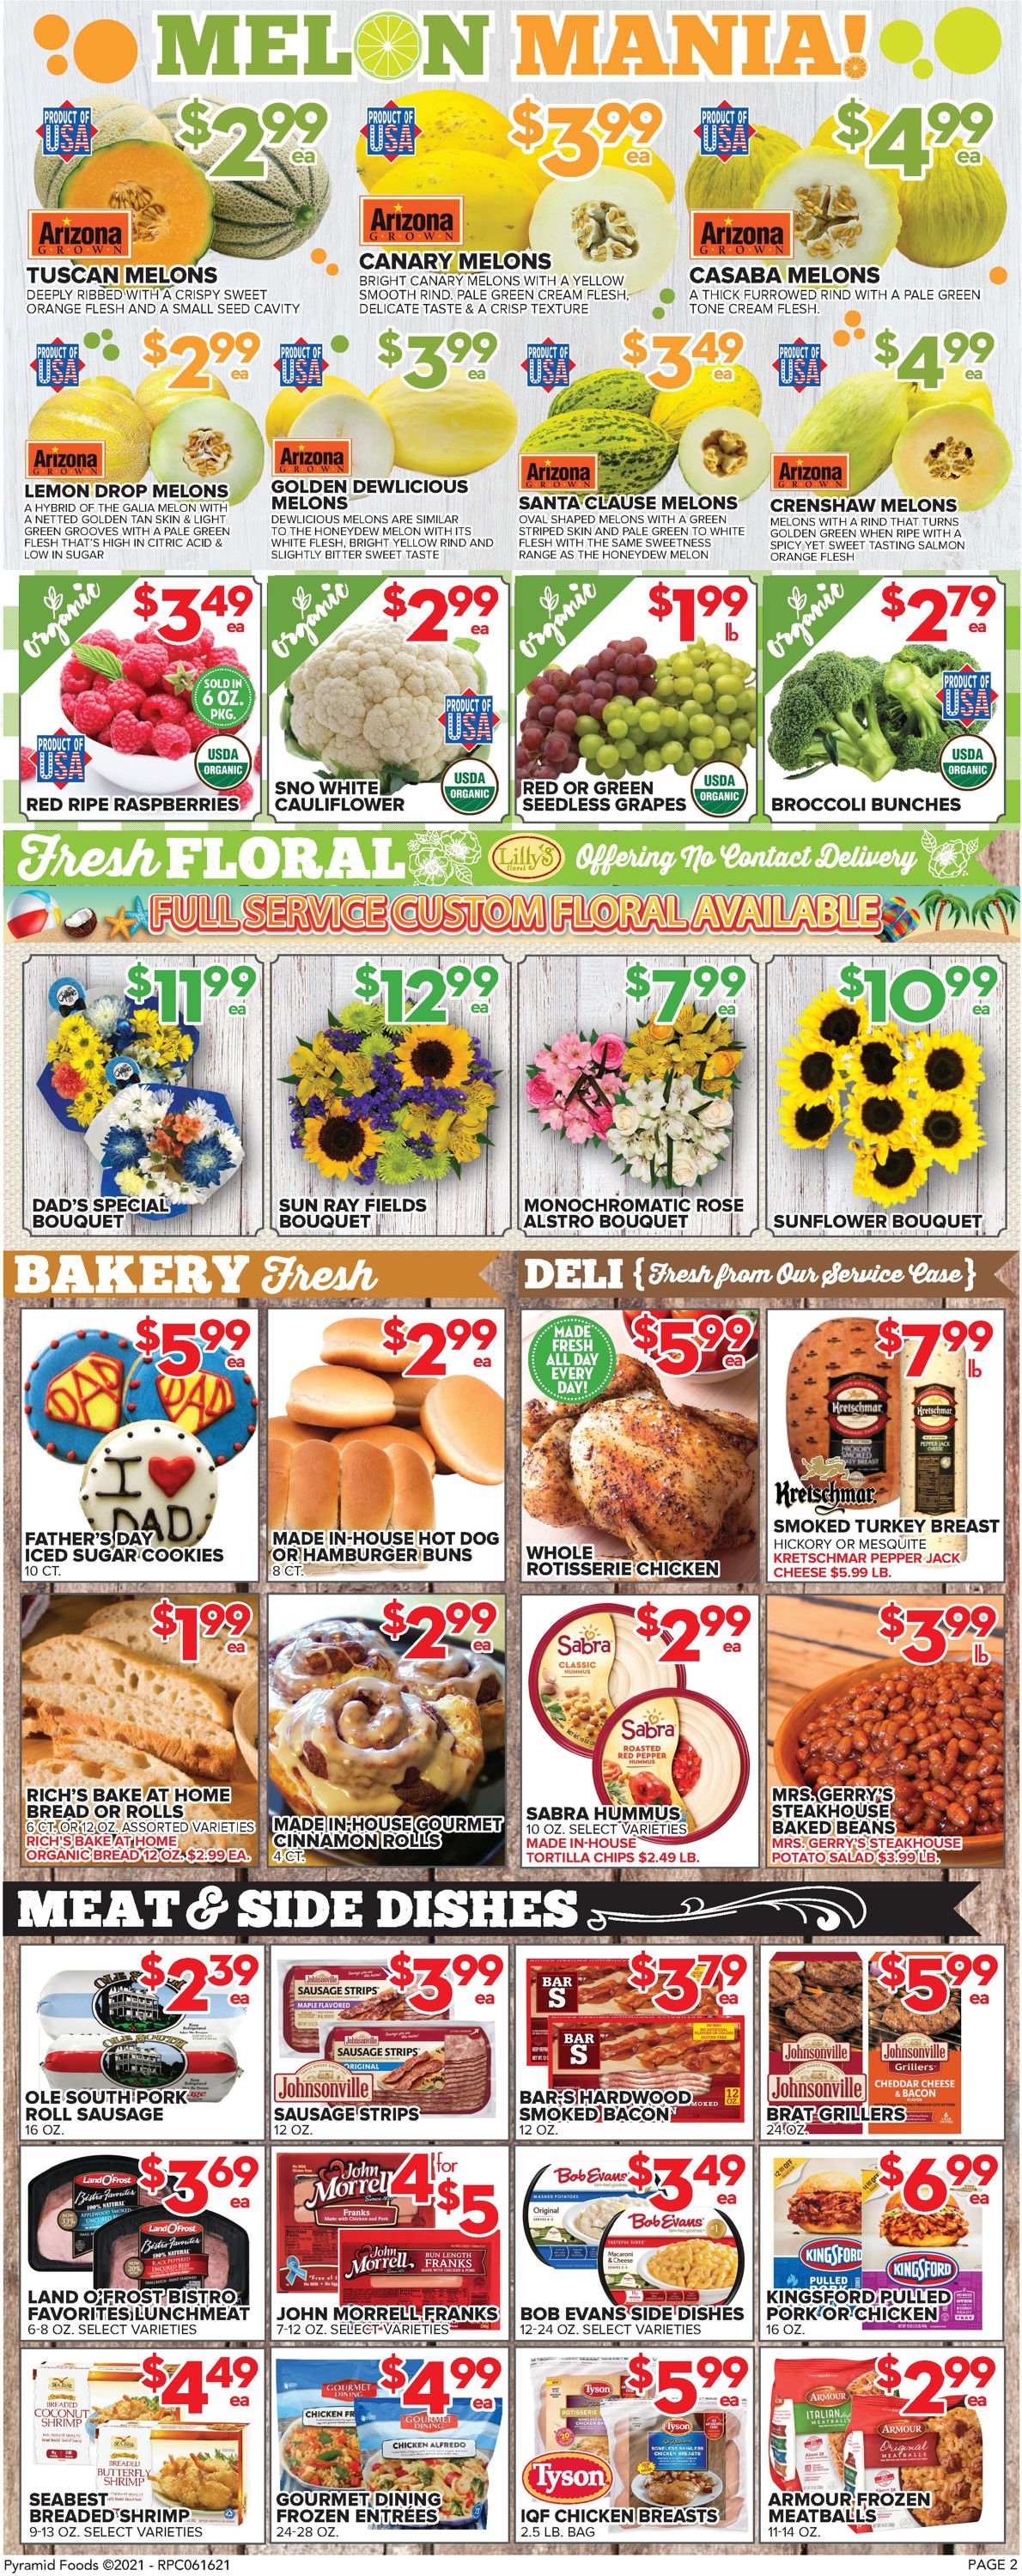 Price Cutter Weekly Ad Circular - valid 06/16-06/22/2021 (Page 2)